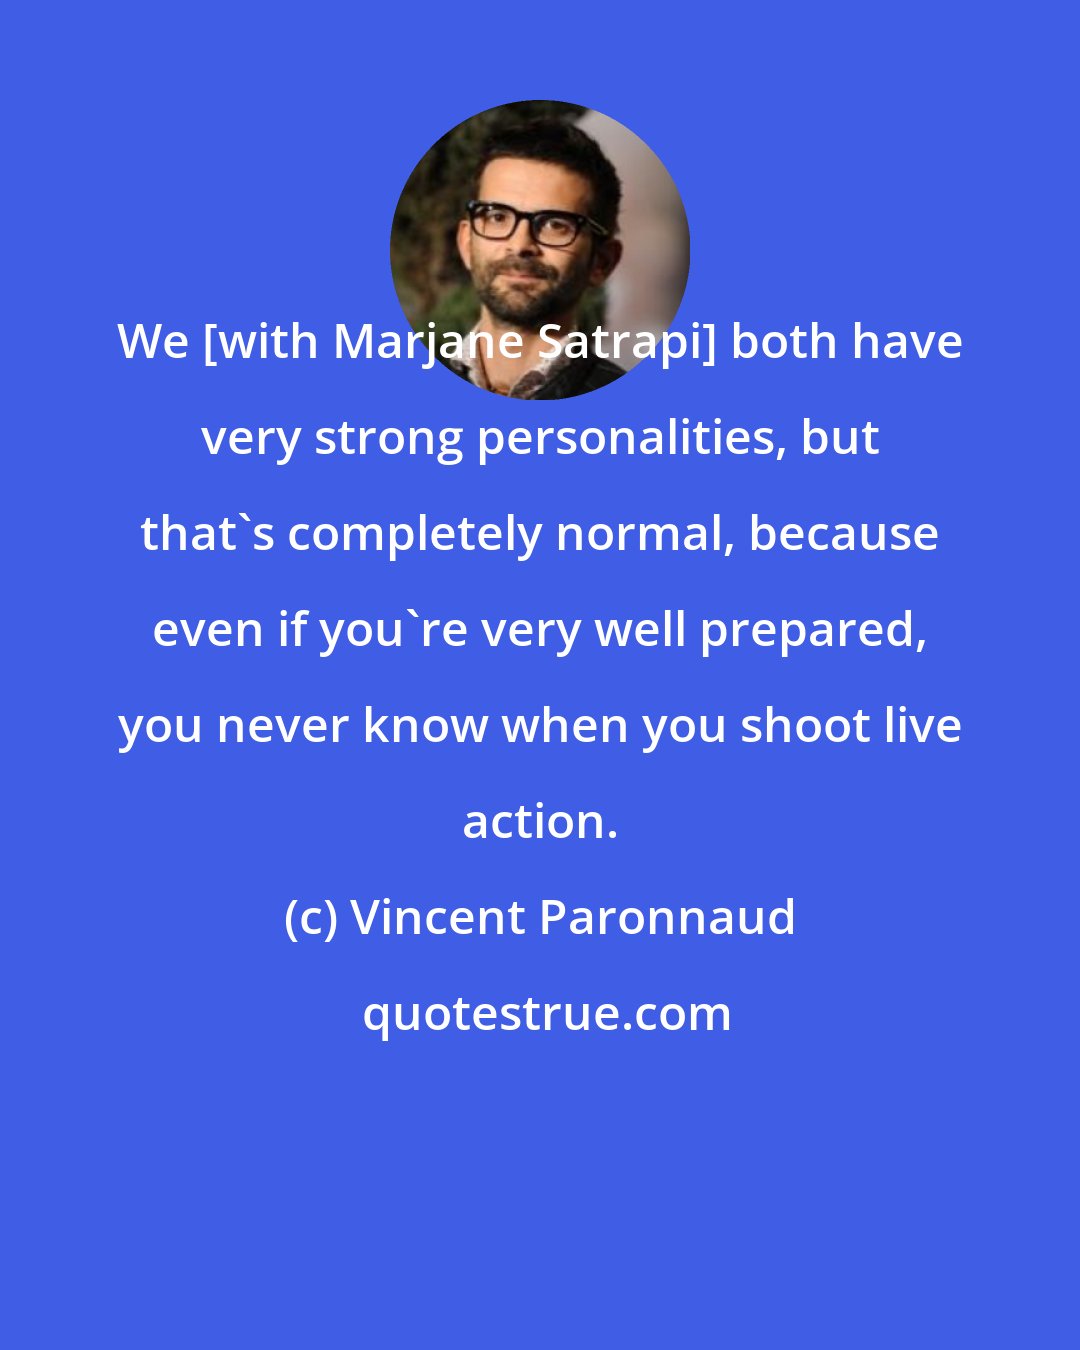 Vincent Paronnaud: We [with Marjane Satrapi] both have very strong personalities, but that's completely normal, because even if you're very well prepared, you never know when you shoot live action.